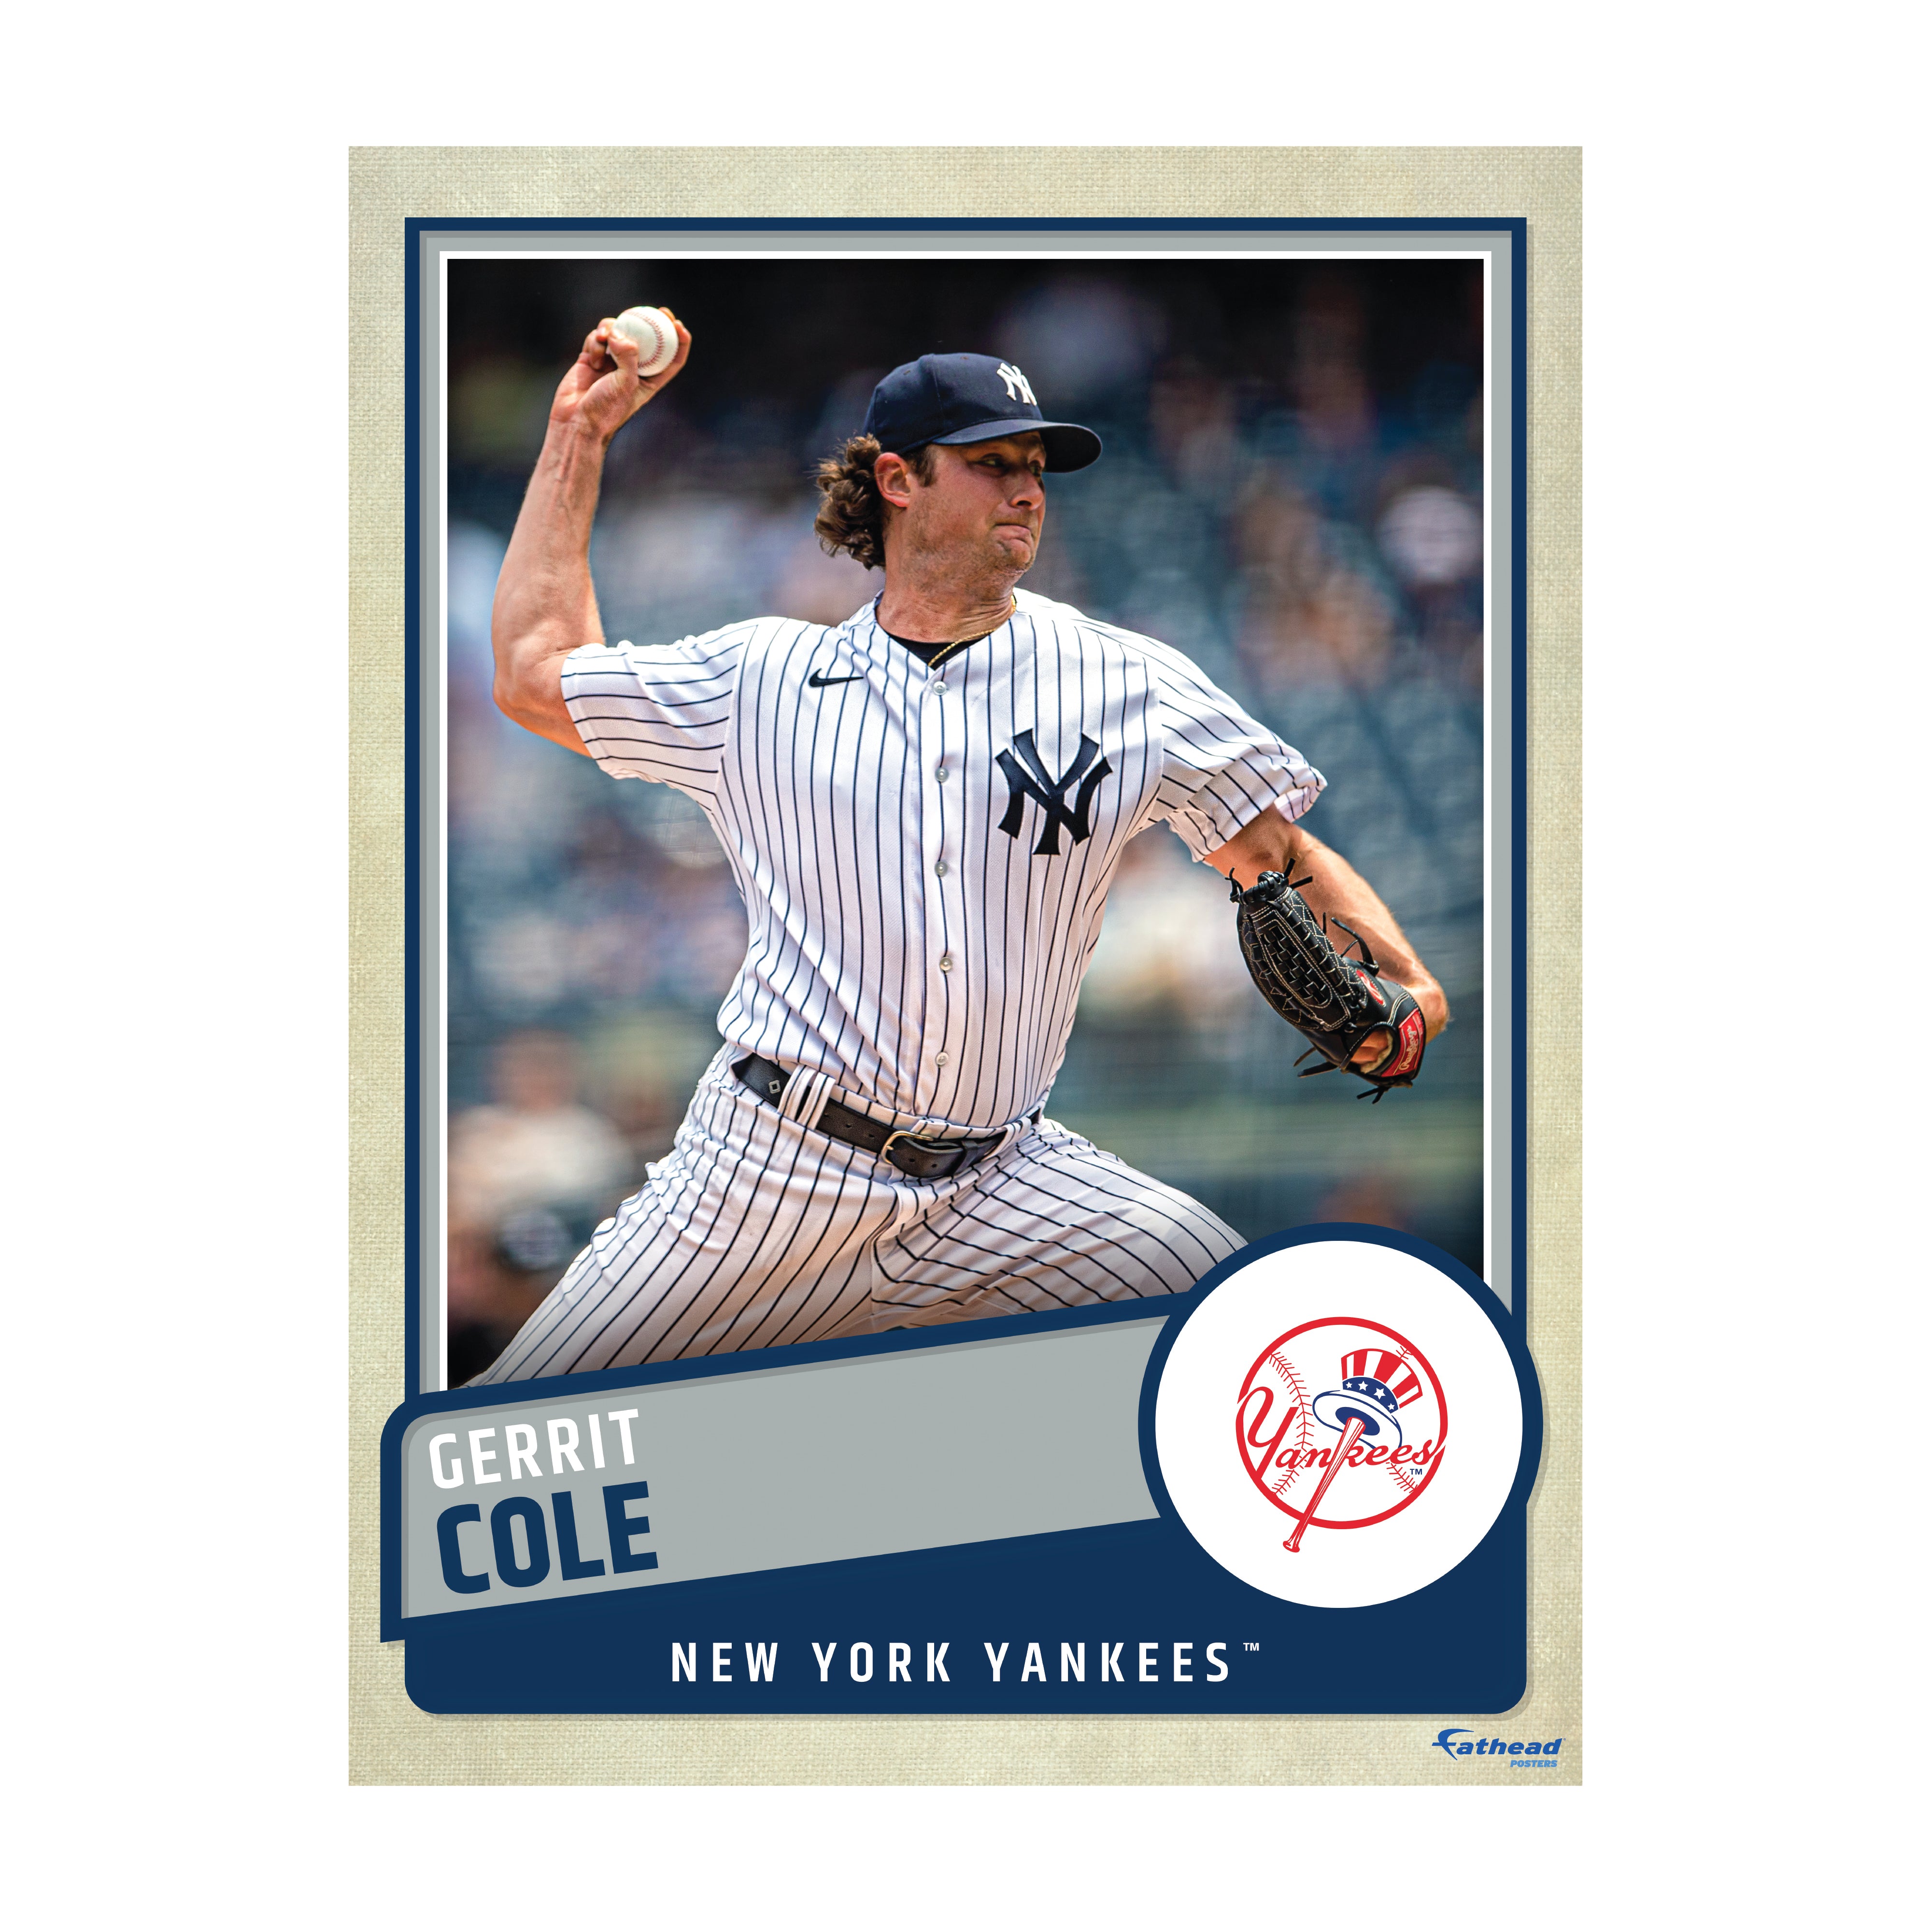 New York Yankees: Gerrit Cole 2022 Poster - Officially Licensed